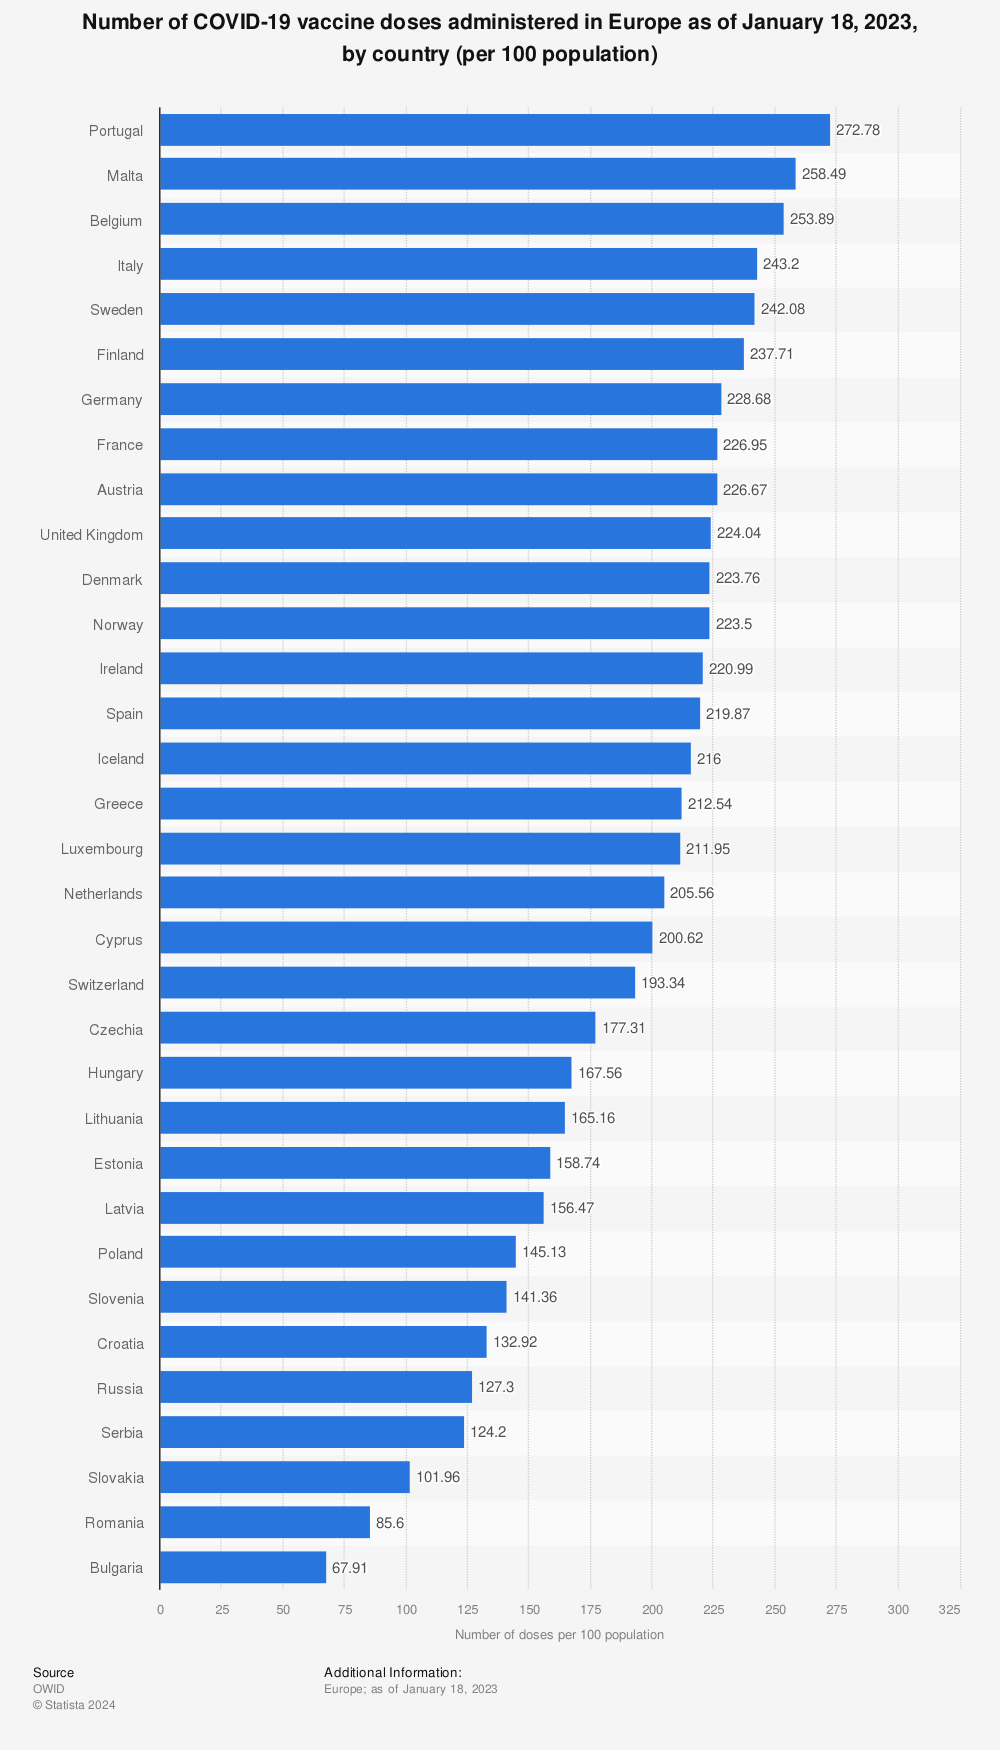 Statistic: Number of COVID-19 vaccine doses administered in Europe as of August 4, 2022, by country (per 100 population) | Statista